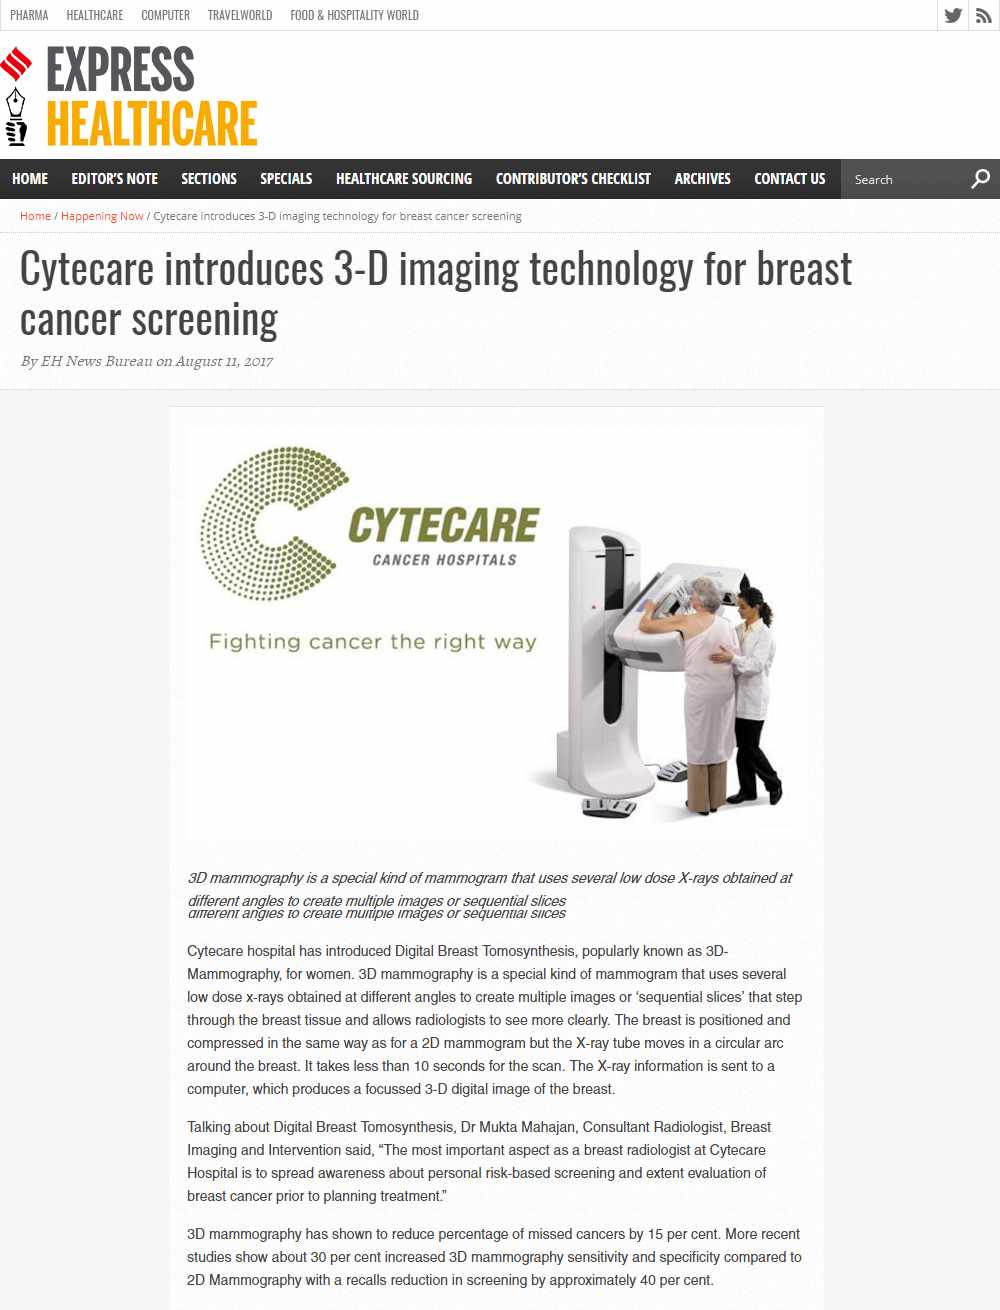 Cytecare introduces 3-D imaging Digital Breast Tomosynthesis for women